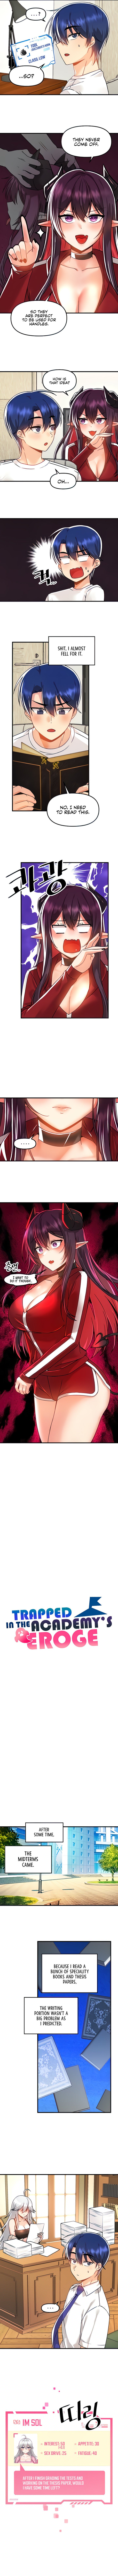 trapped-in-the-academys-eroge-chap-49-1